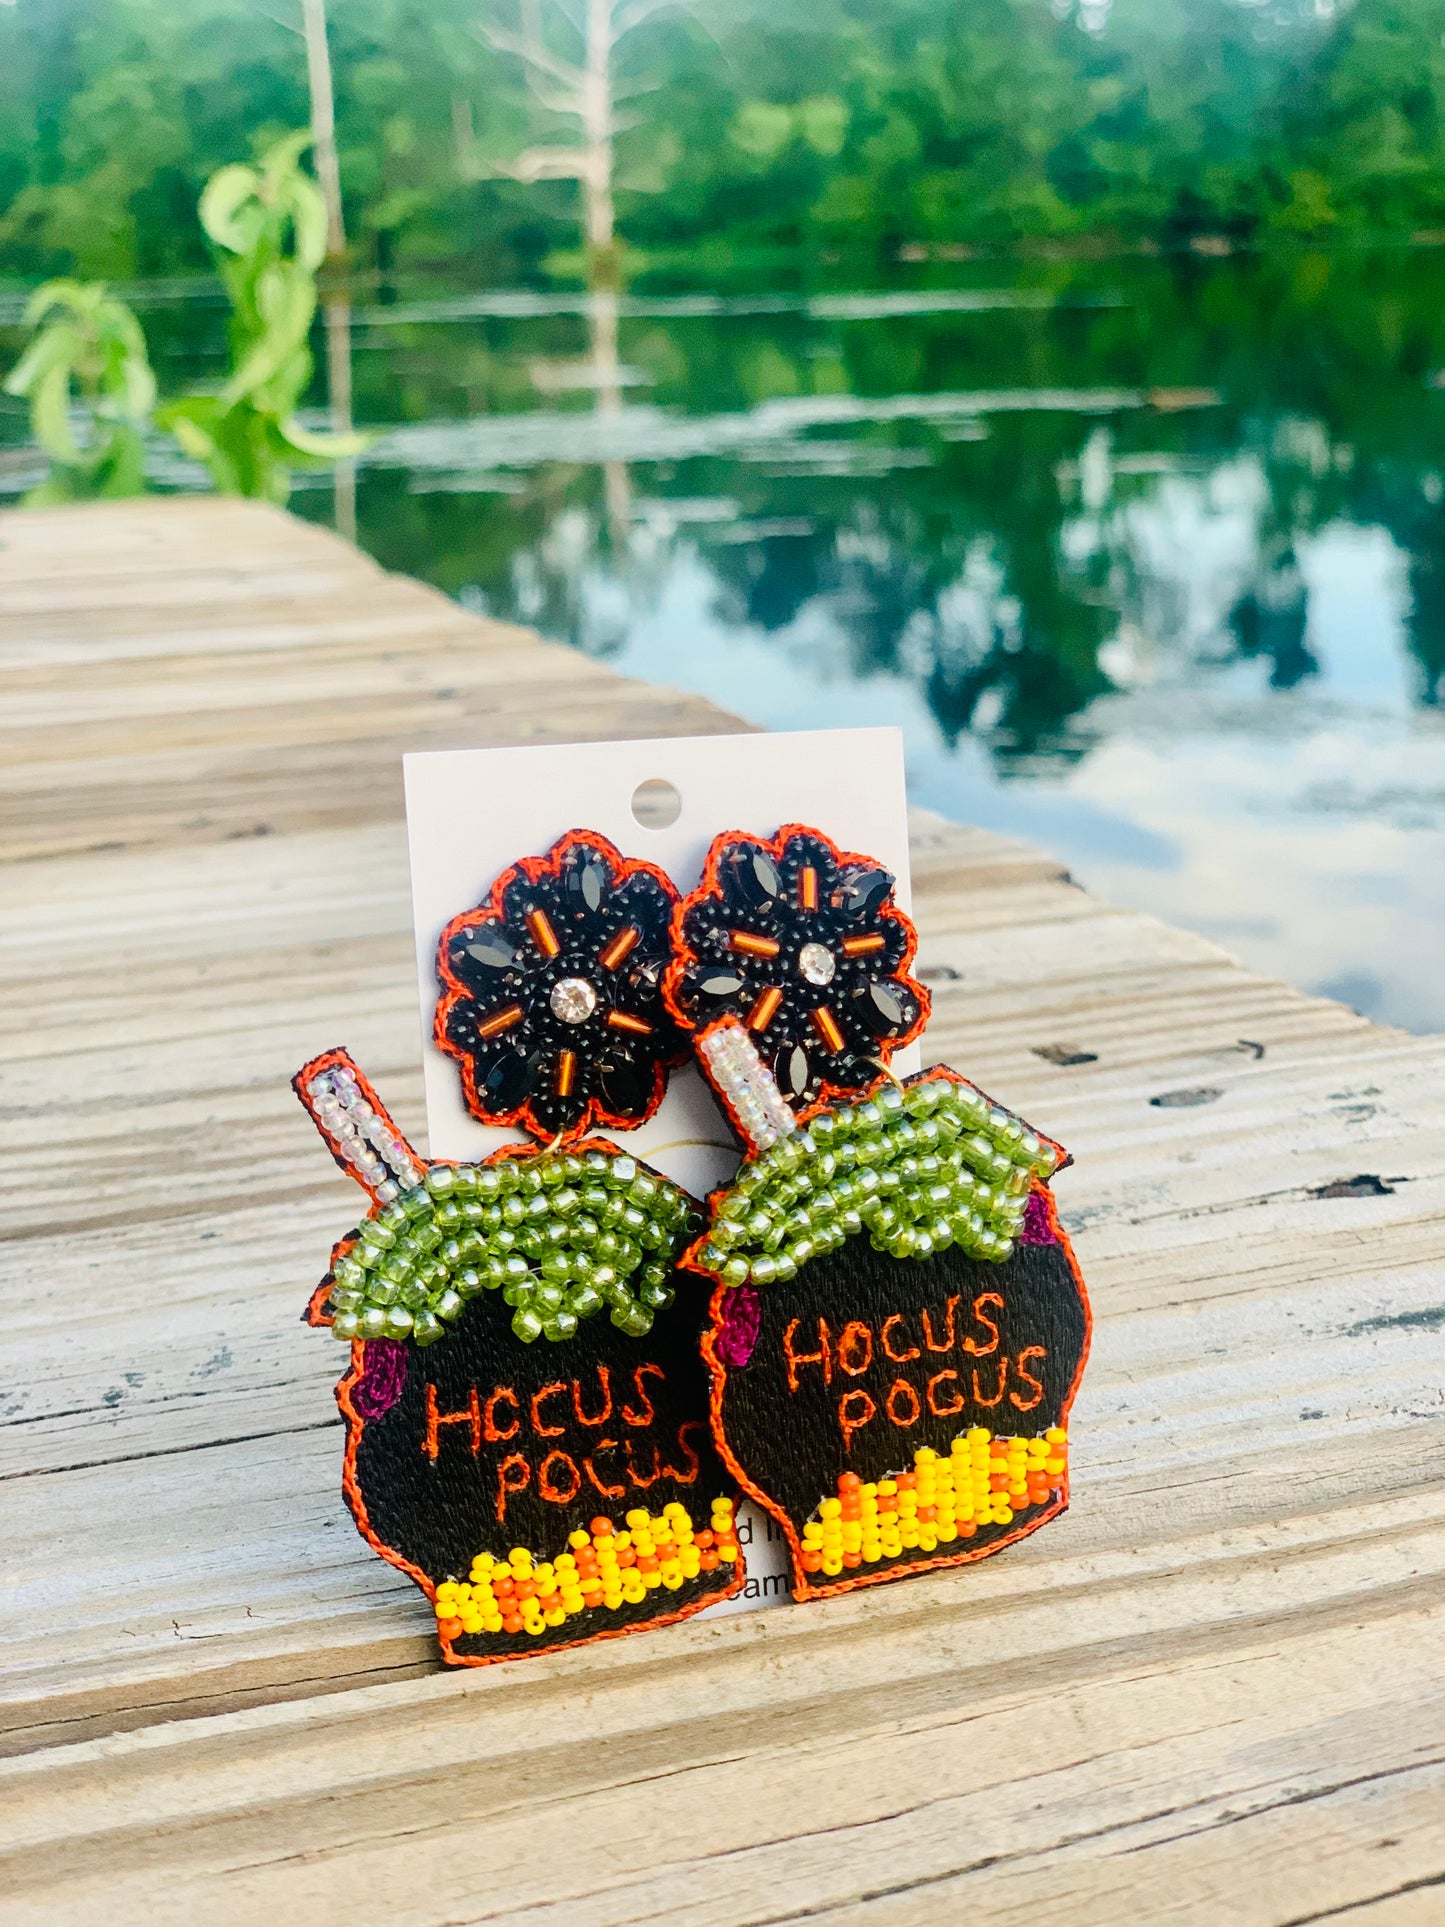 It’s Just A Bunch of Hocus Pocus Earrings - MBA Exclusive